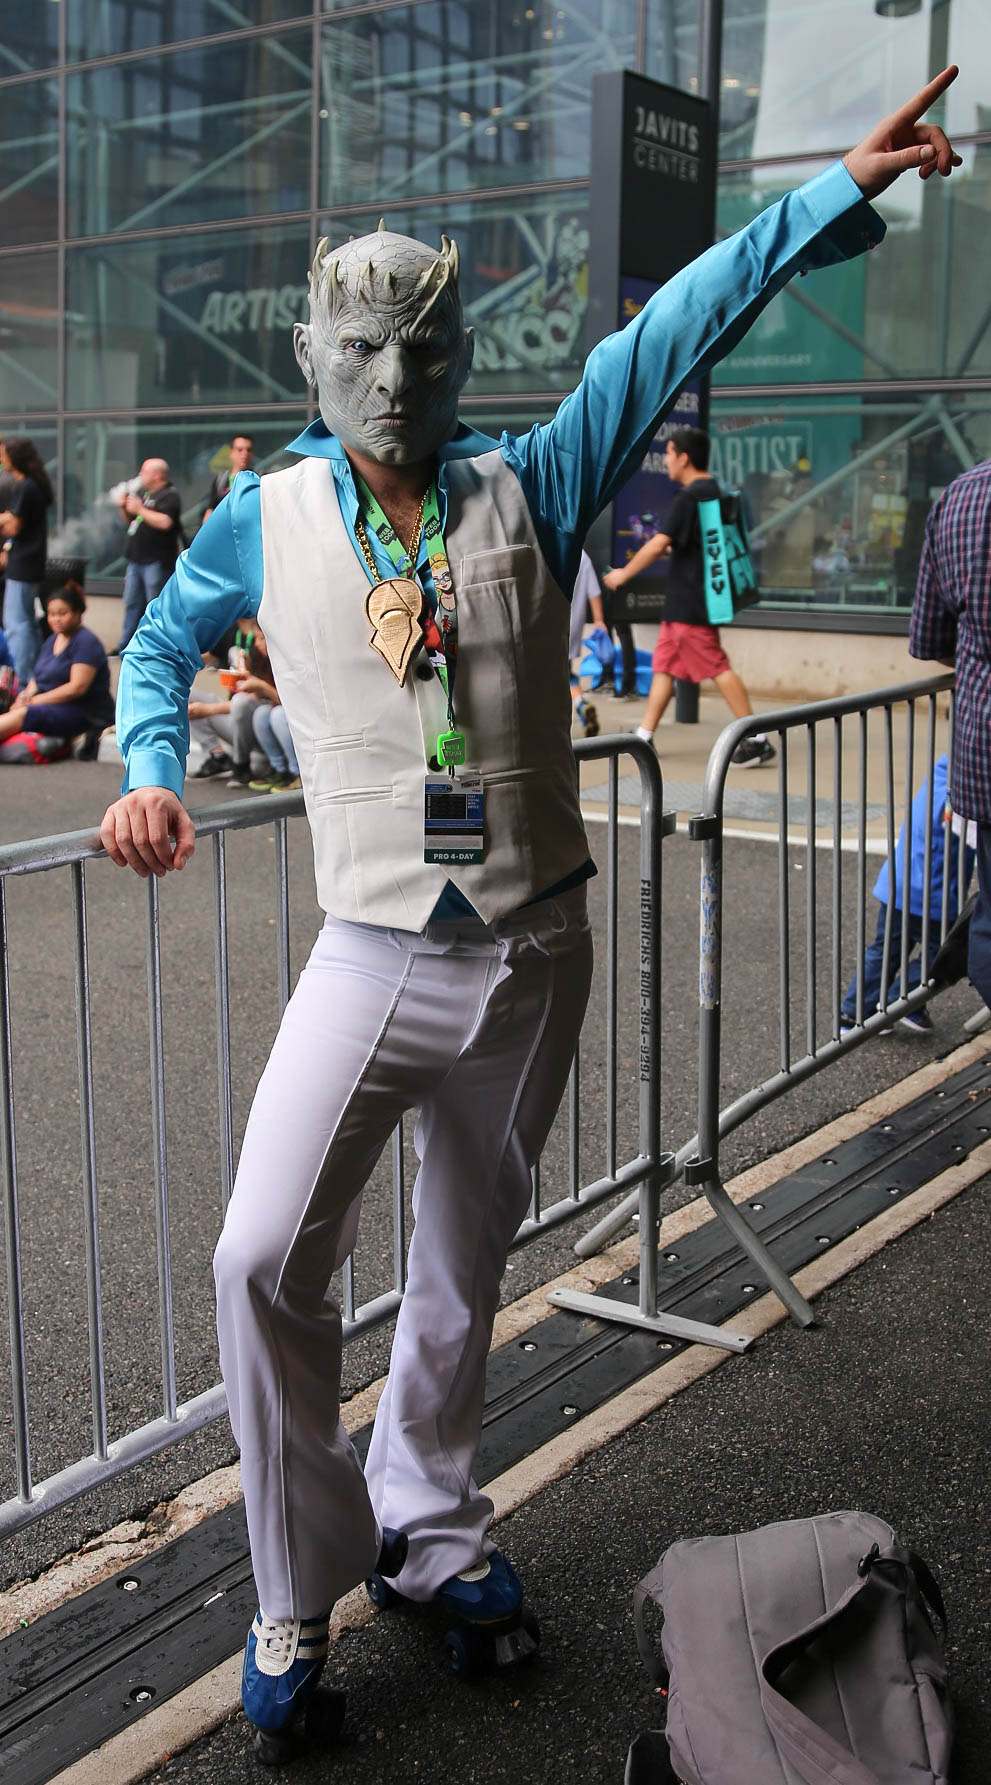 nycc5 Best Costumes from Comic Con in New York 2017